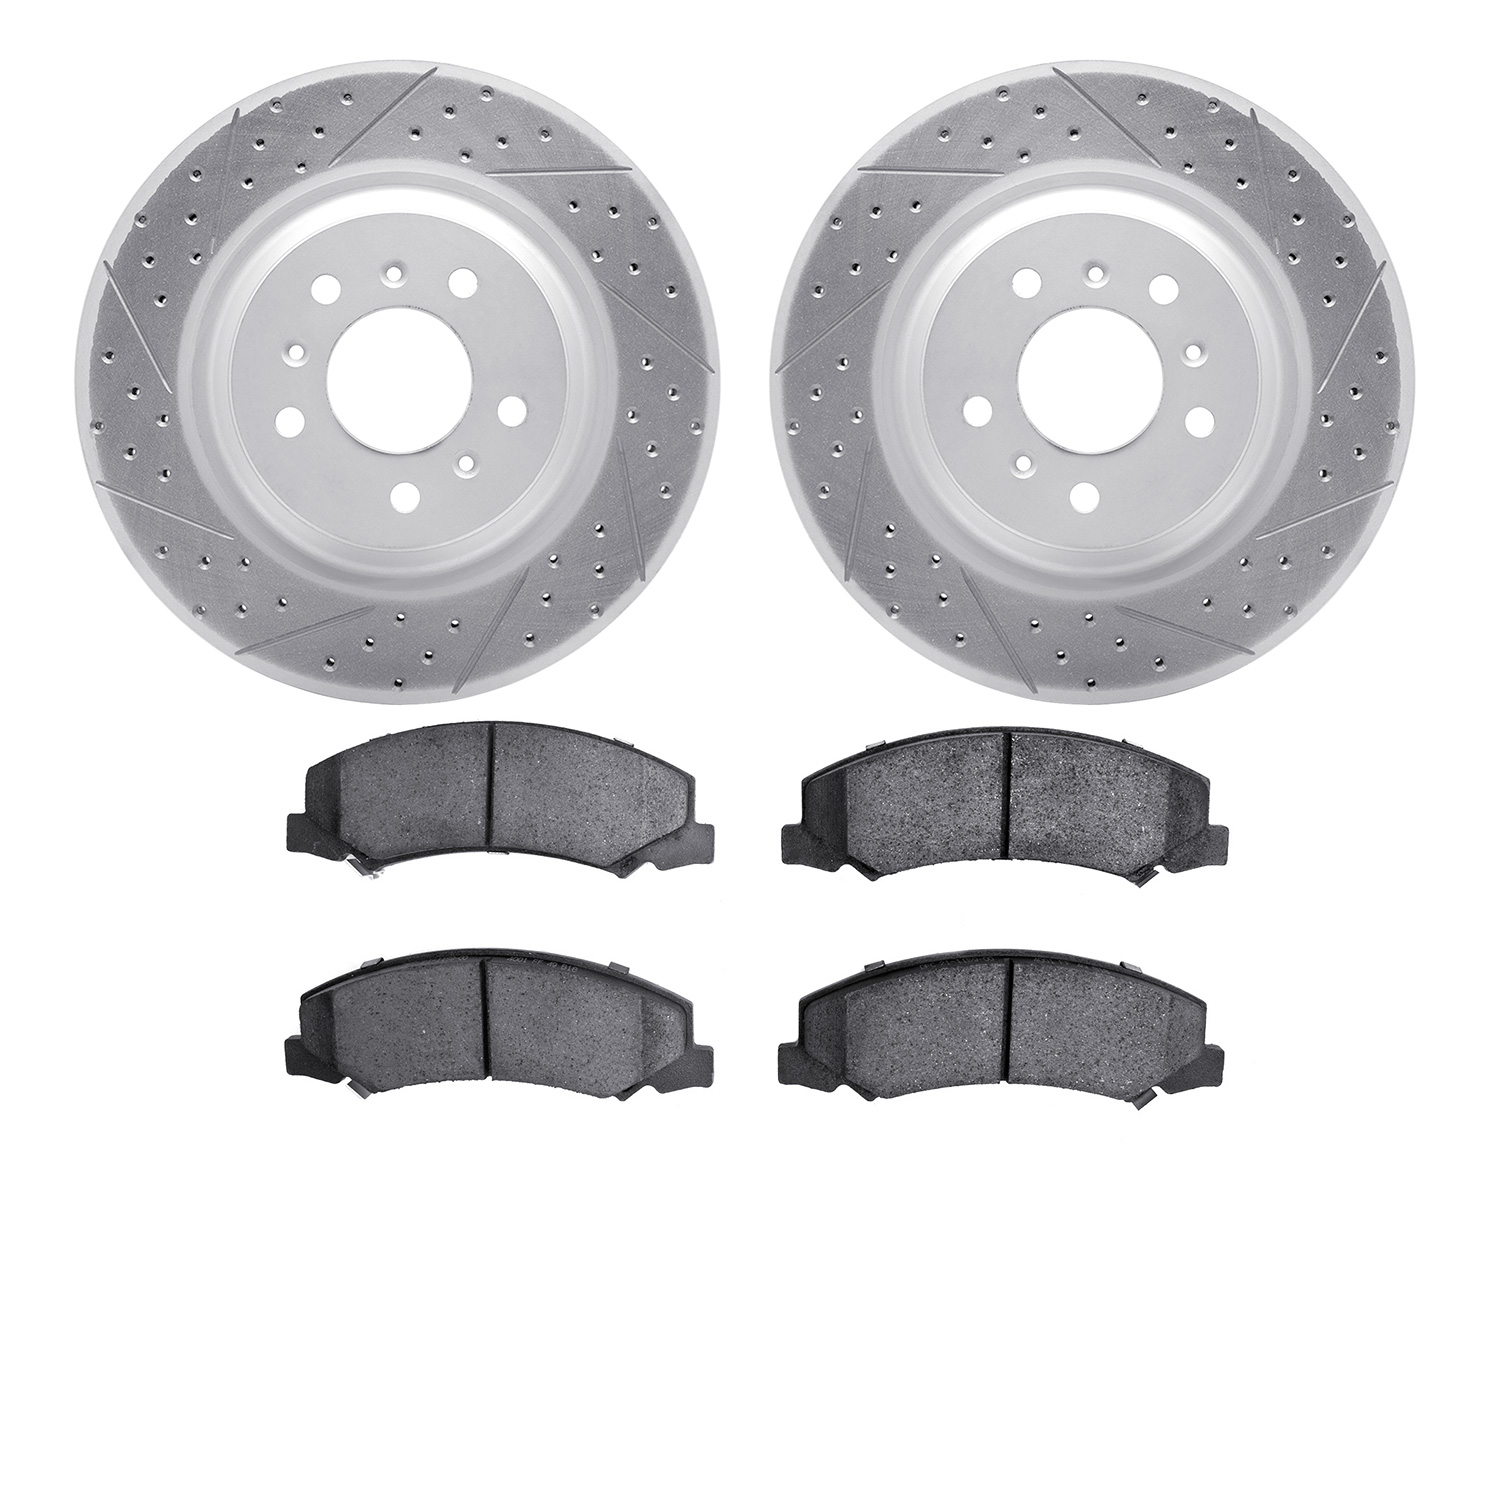 2602-46019 Geoperformance Drilled/Slotted Rotors w/5000 Euro Ceramic Brake Pads Kit, 2006-2016 GM, Position: Front